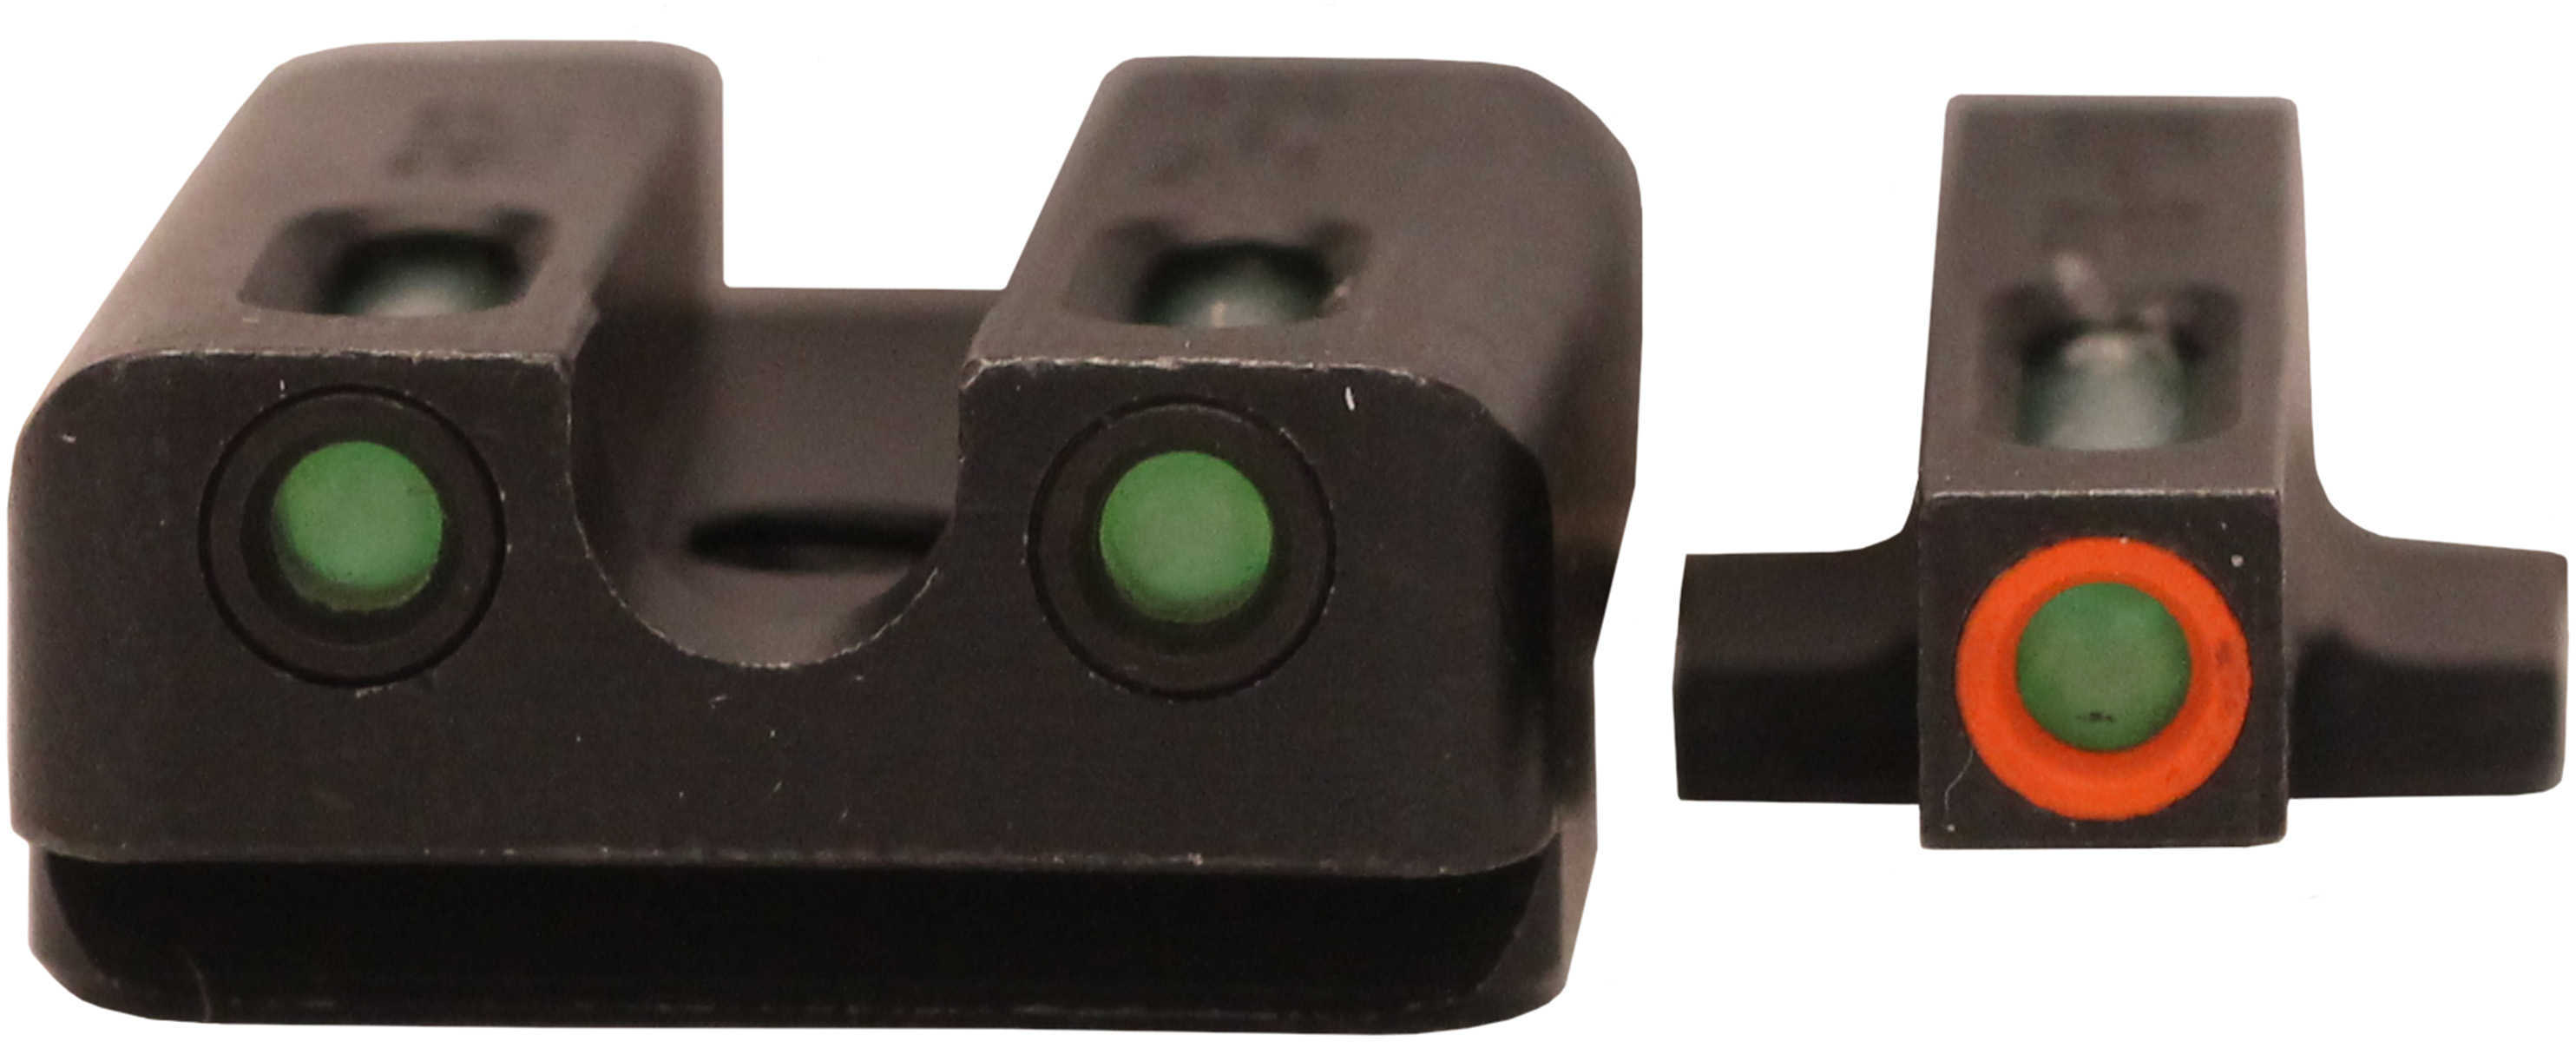 Truglo TFX Sight Set FNH FNP-45 and FNX-45 Md: TG13FN3PC